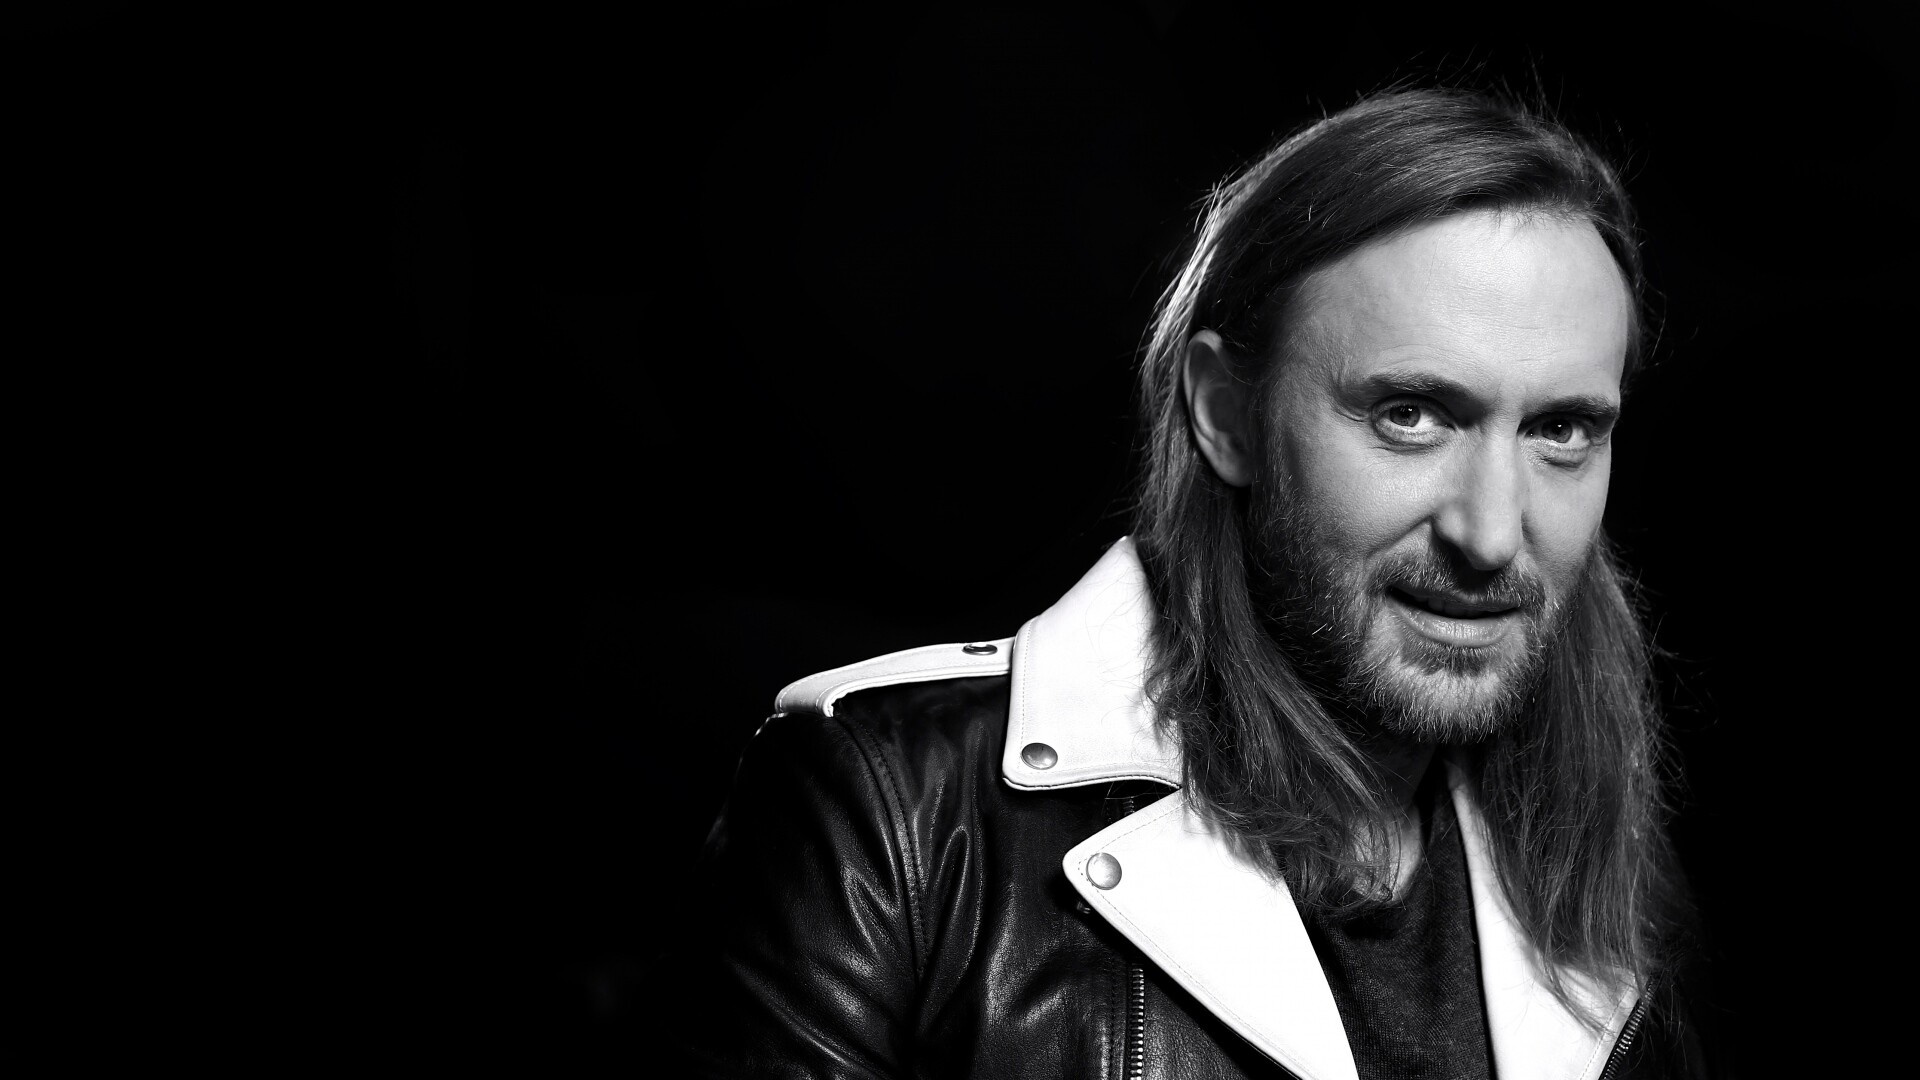 David Guetta: The EP New Rave, July 2020, The track "Kill Me Slow", Monochrome. 1920x1080 Full HD Background.